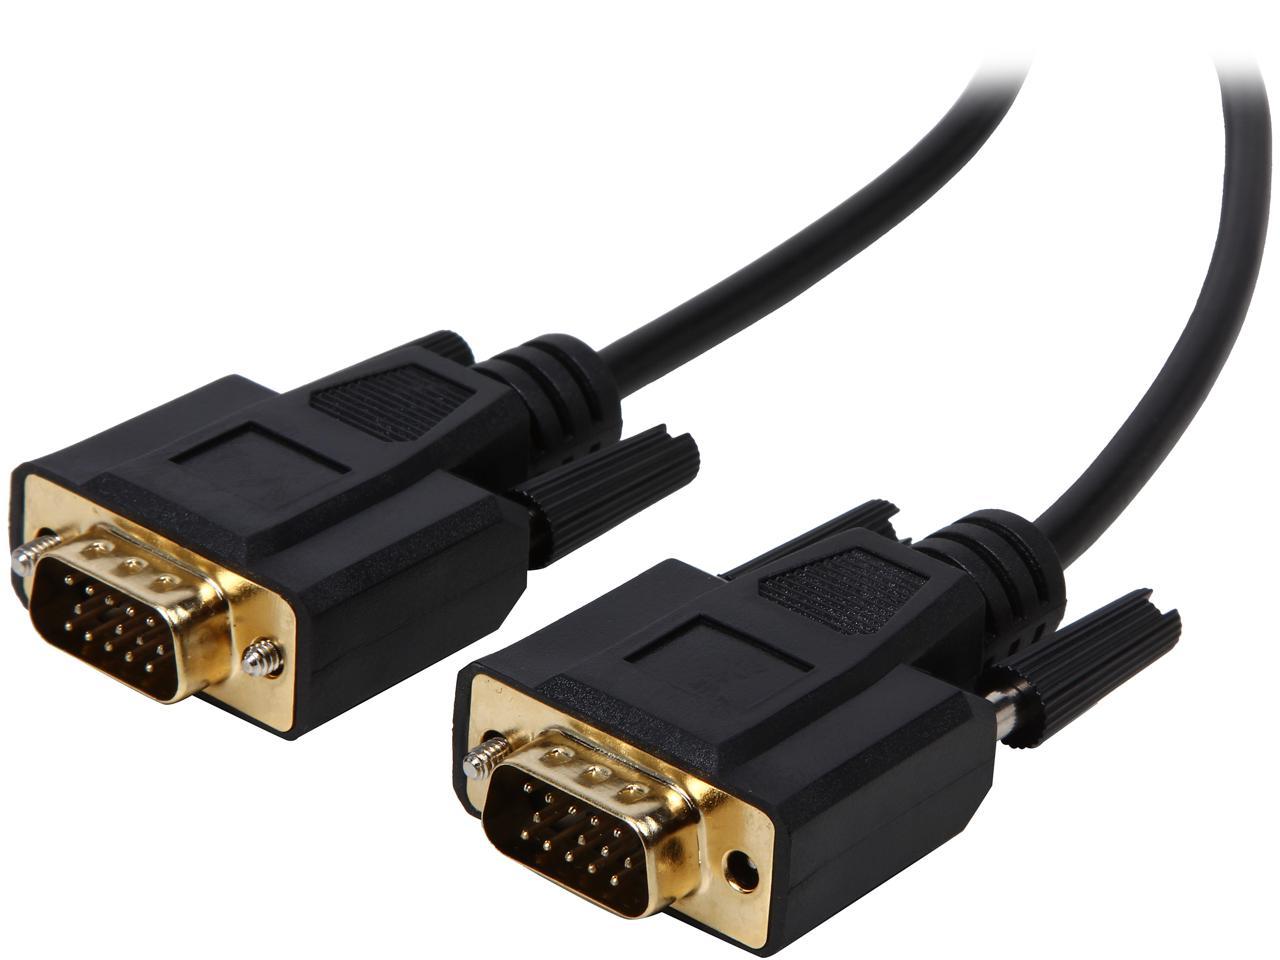 Tripp Lite P512-010 10 ft. VGA Monitor Cable HD-15M to HD-15M Gold Connectors - image 1 of 3